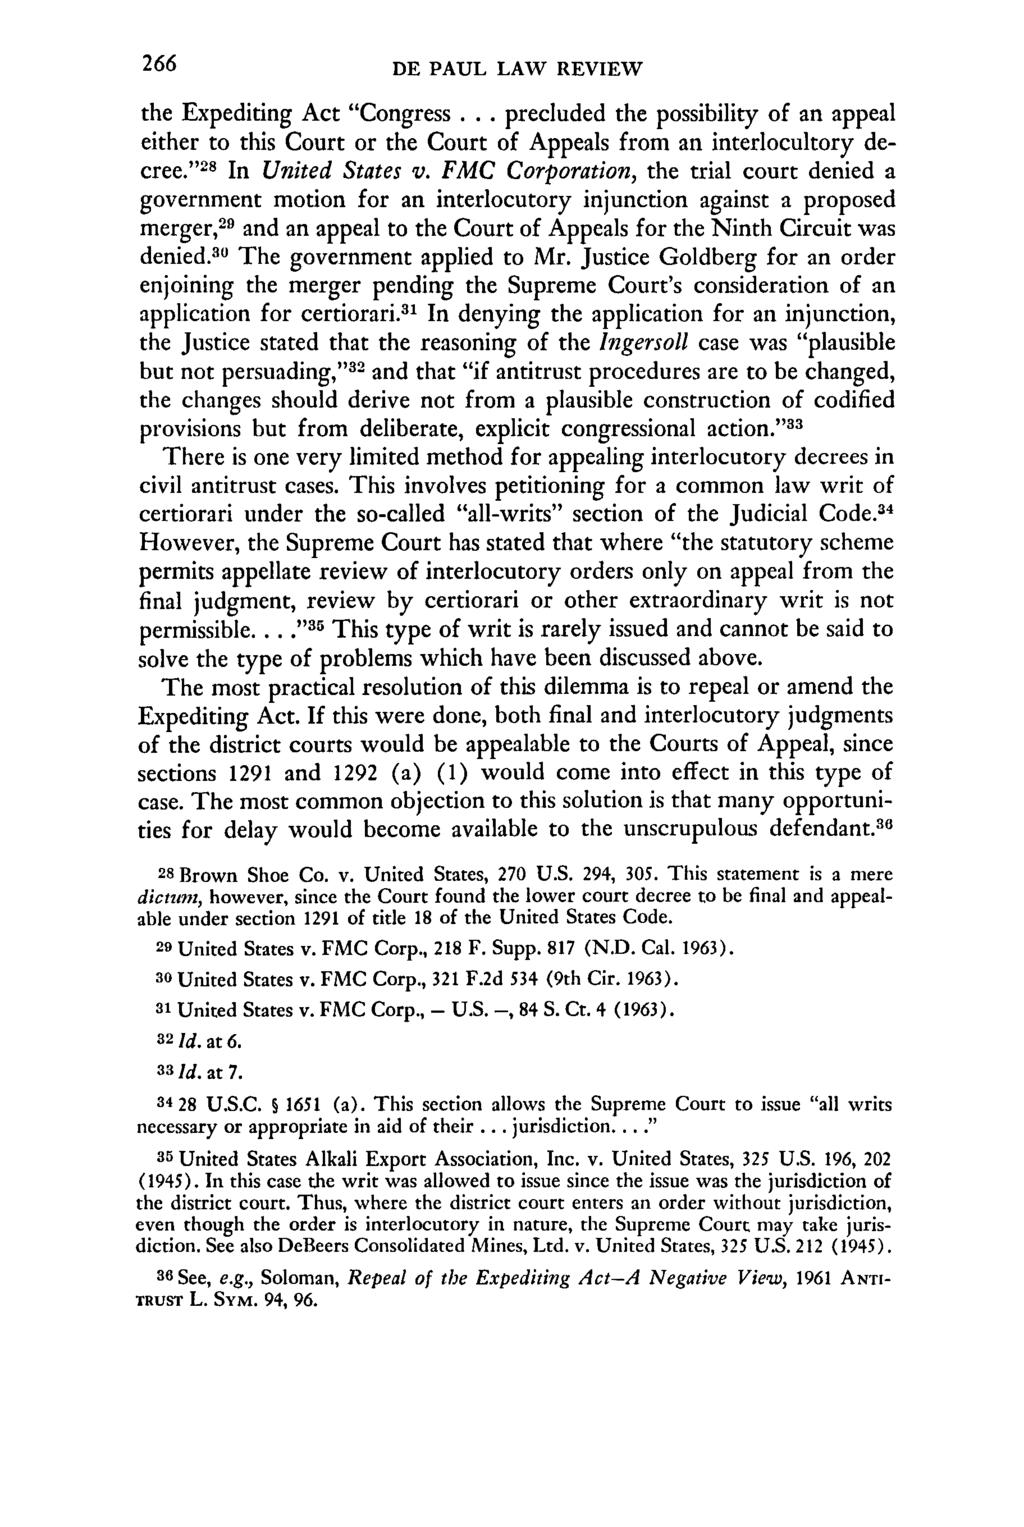 DE PAUL LAW REVIEW the Expediting Act "Congress... precluded the possibility of an appeal either to this Court or the Court of Appeals from an interlocultory decree." '28 In United States v.